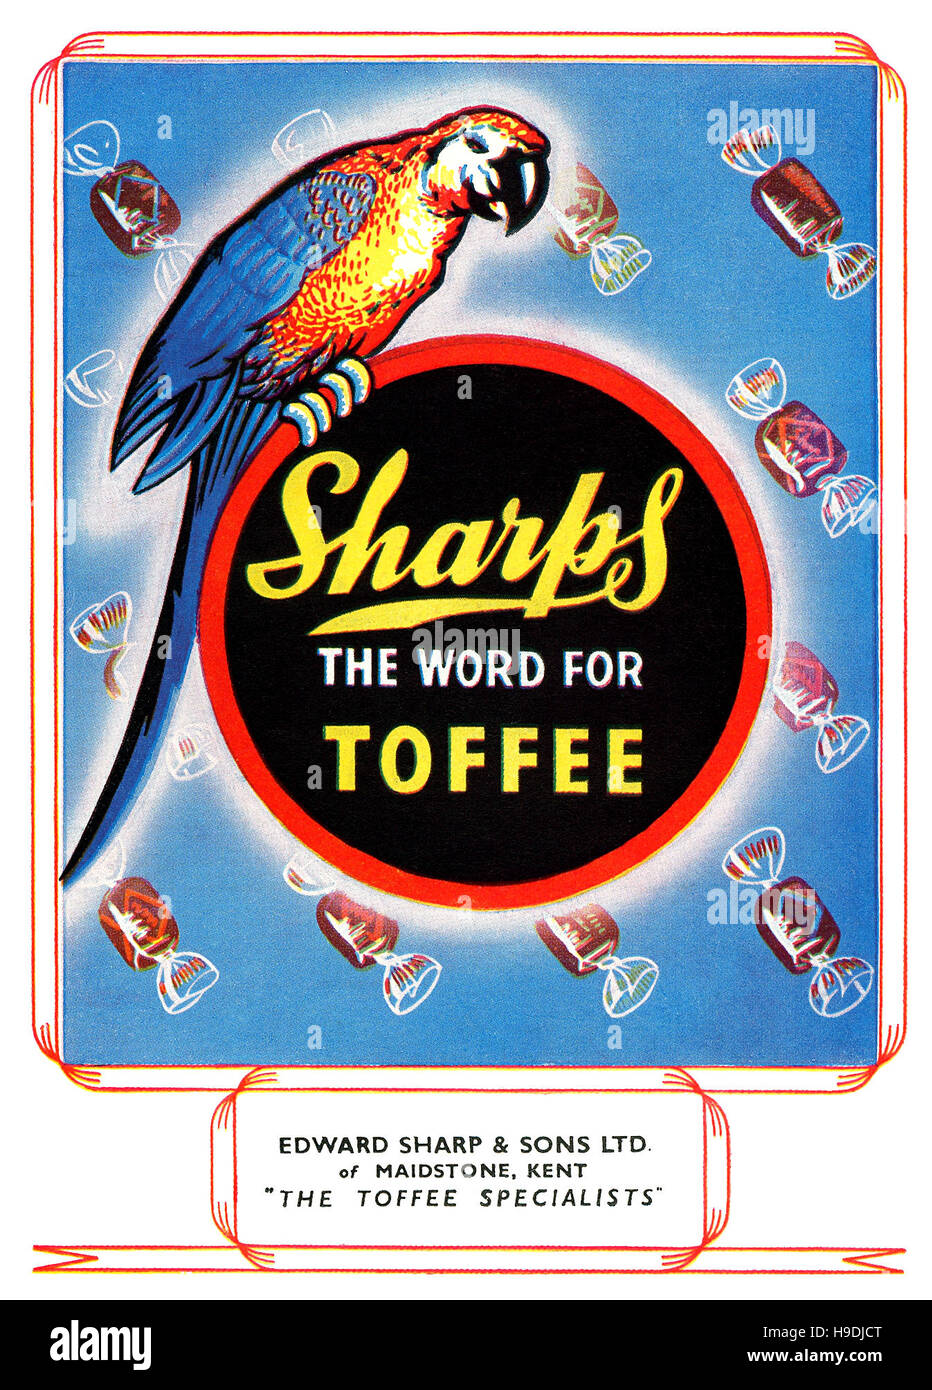 1947 British advertisement for Sharps Toffee Stock Photo